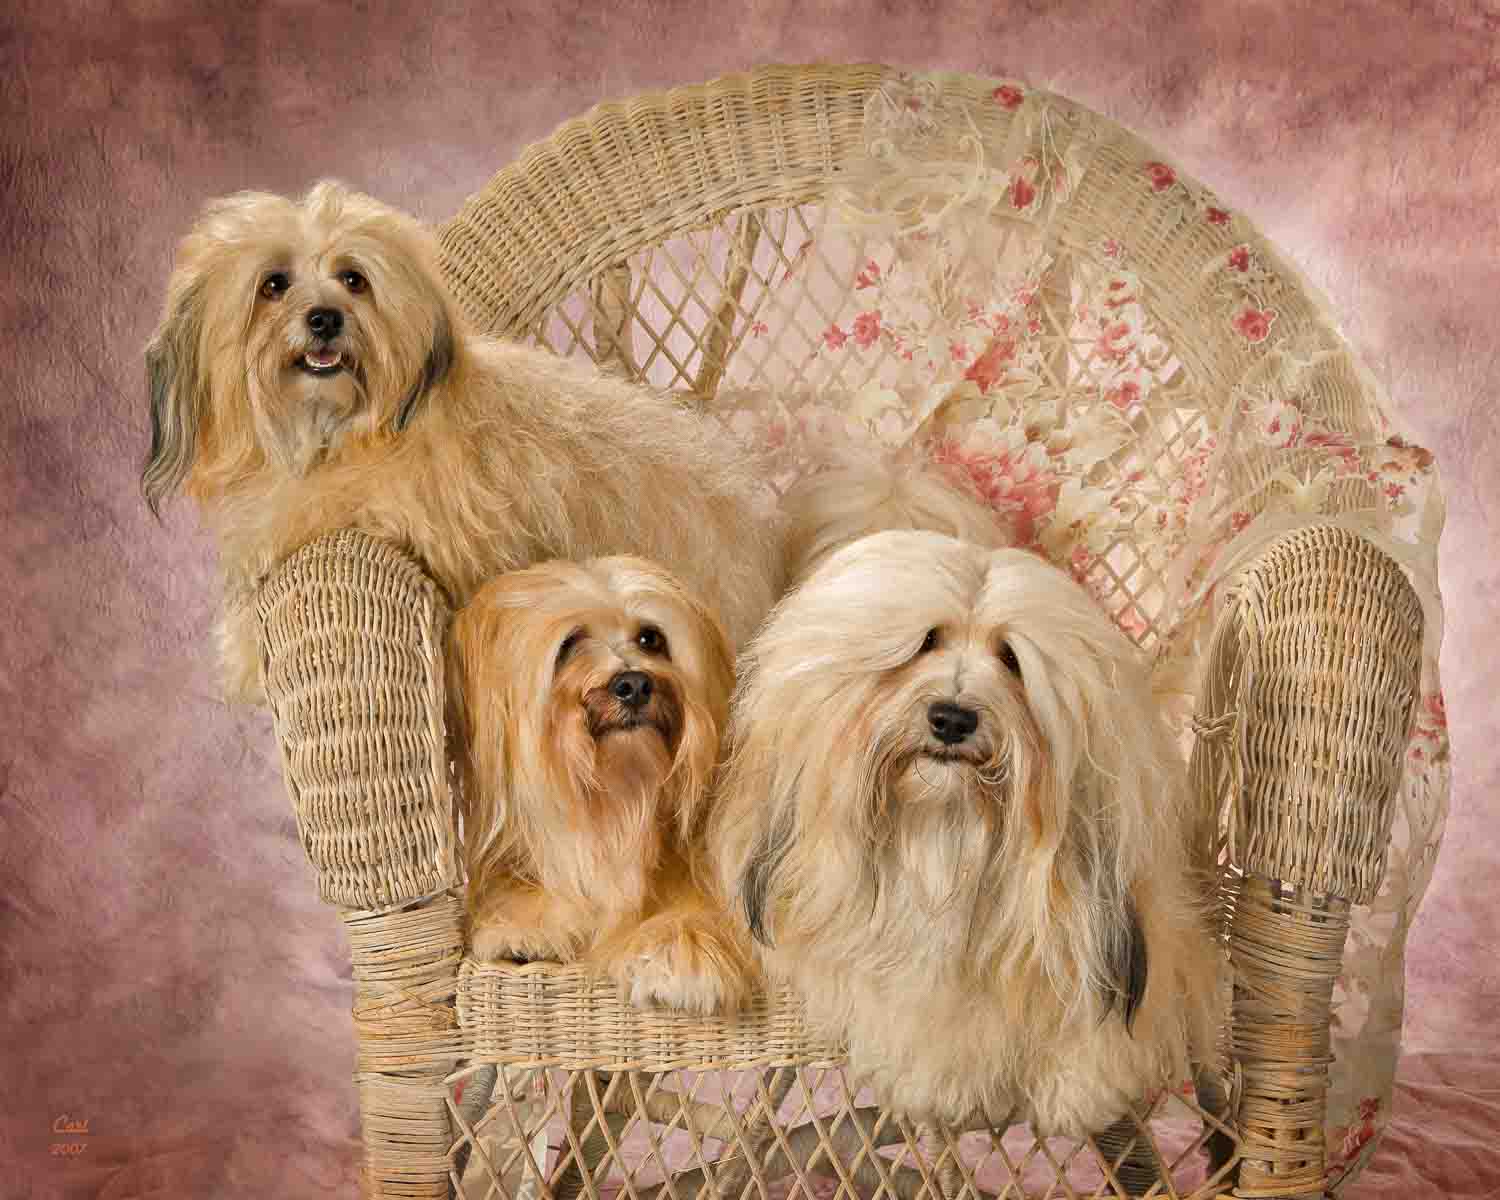 Three dogs sitting in a wicker chair